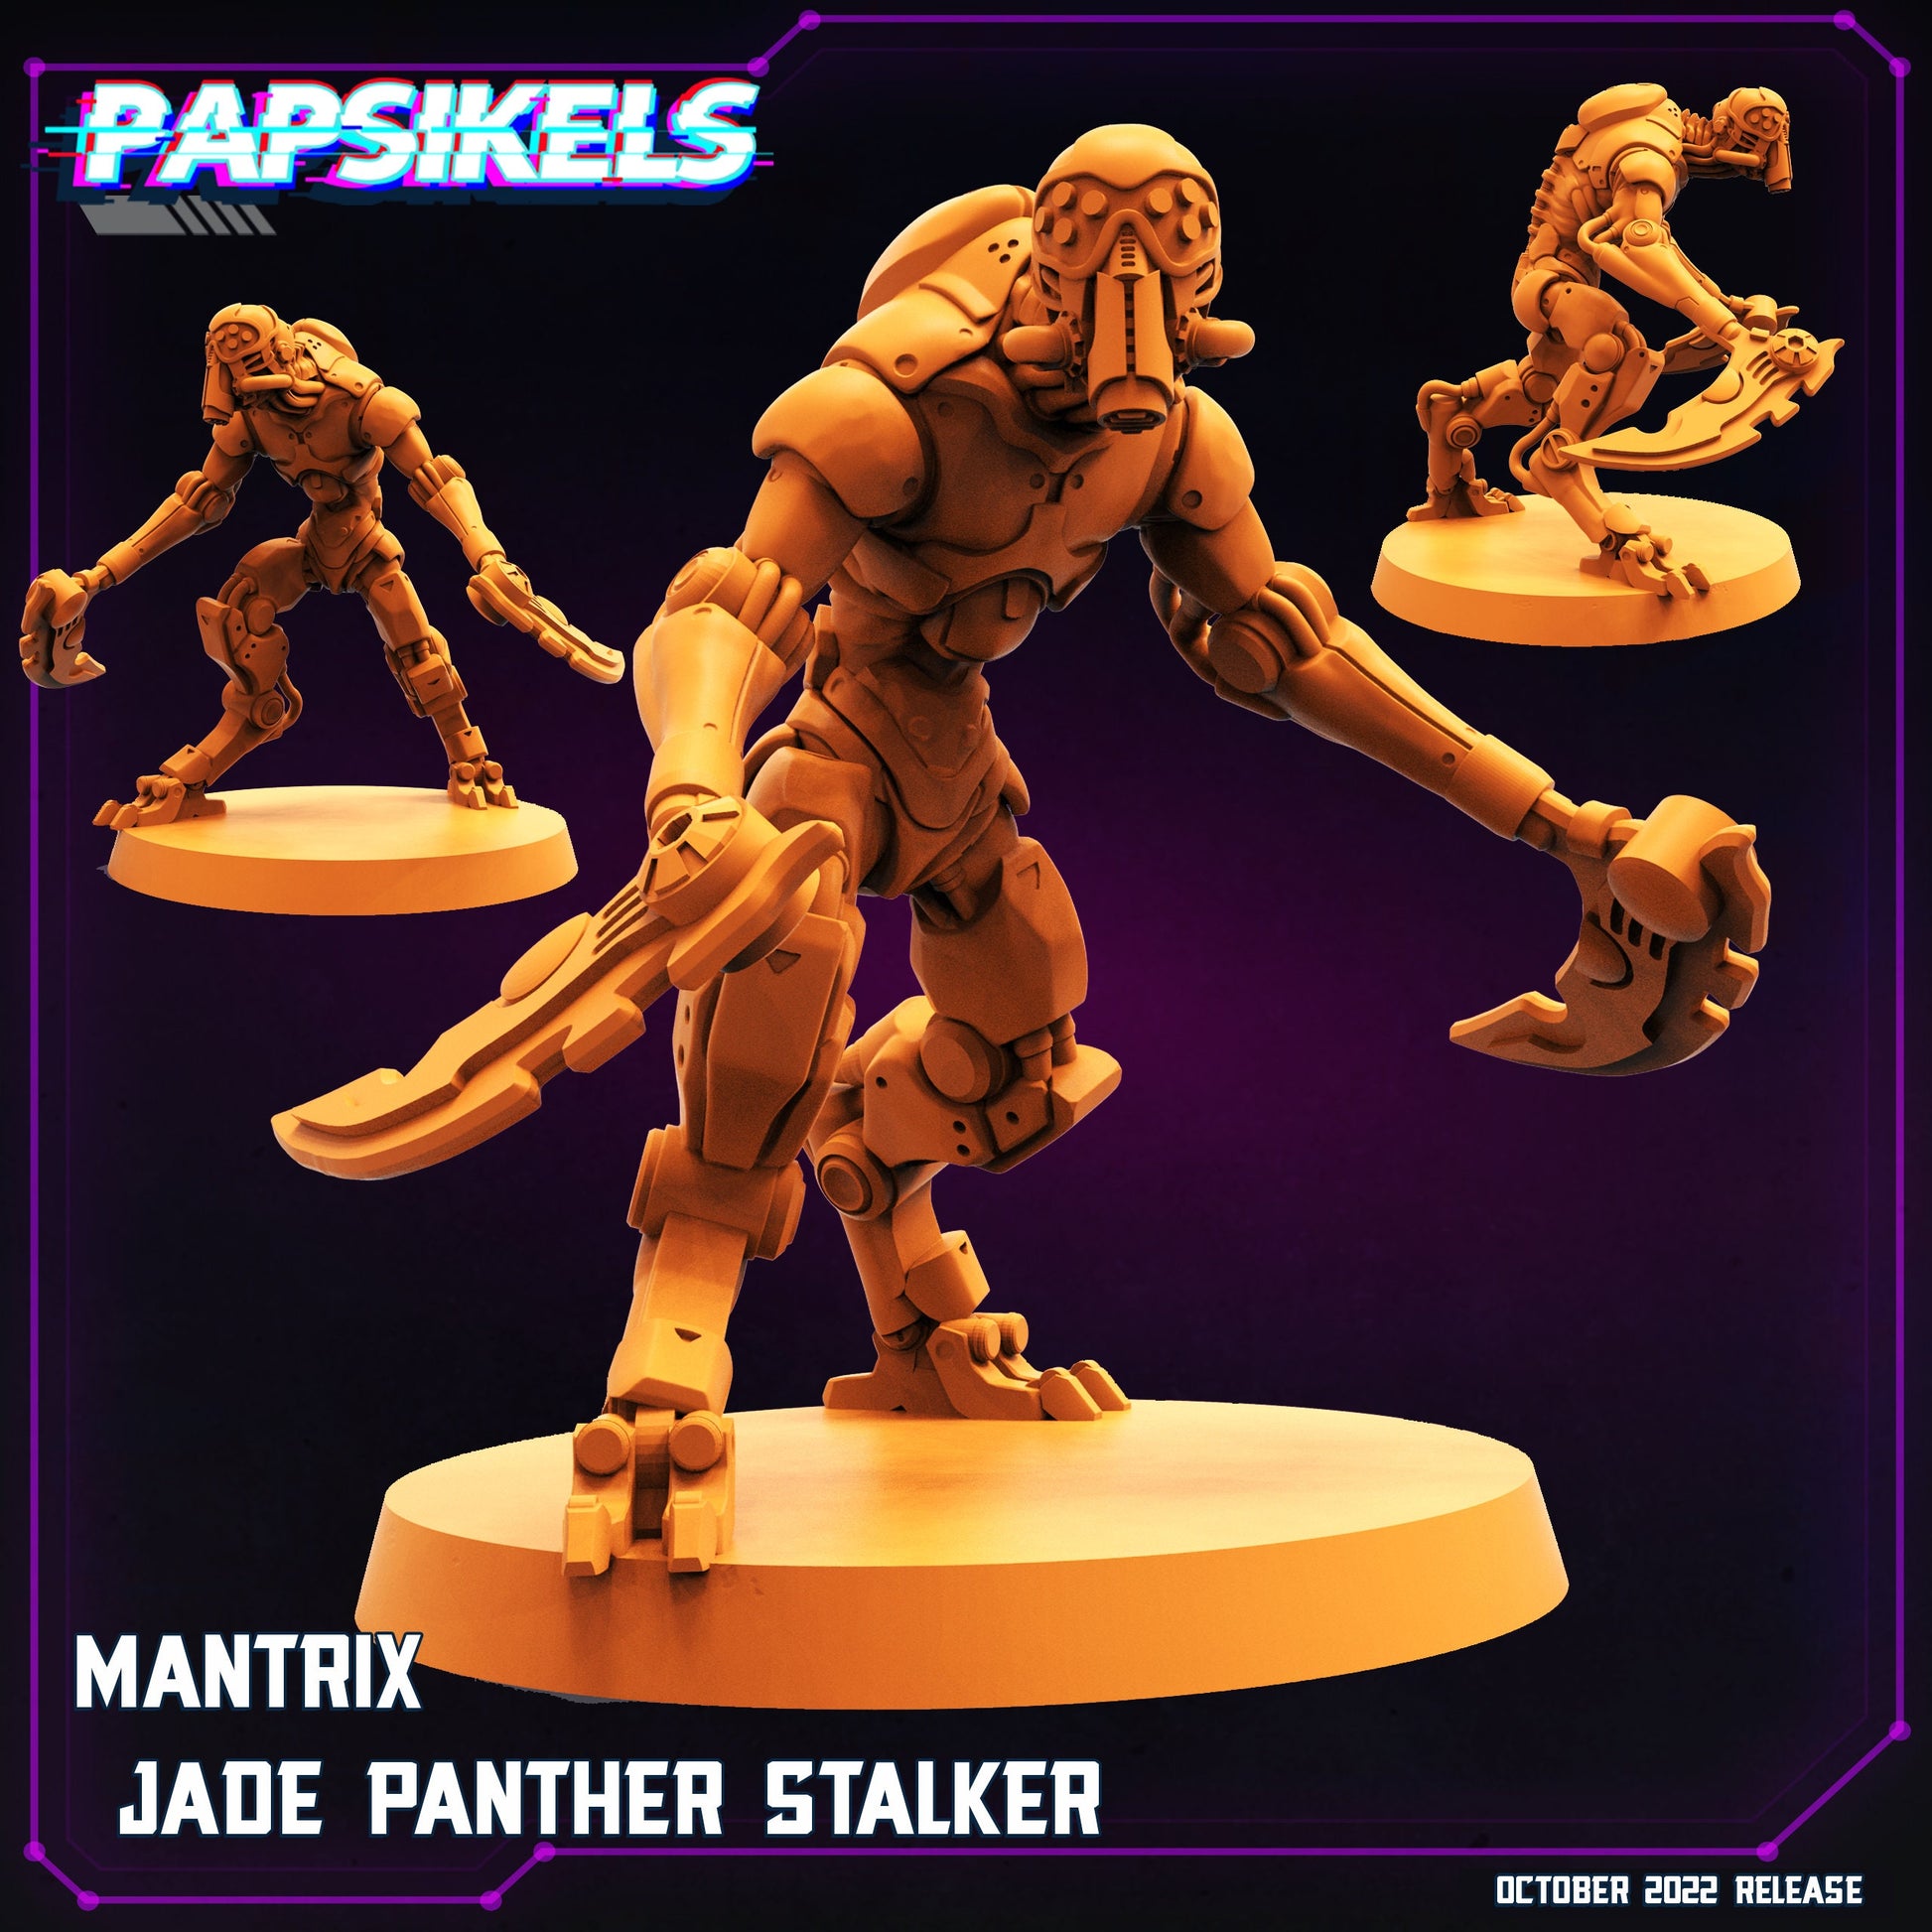 Mantrix - Jade Panther Stalker (sculpted by Papsikels)